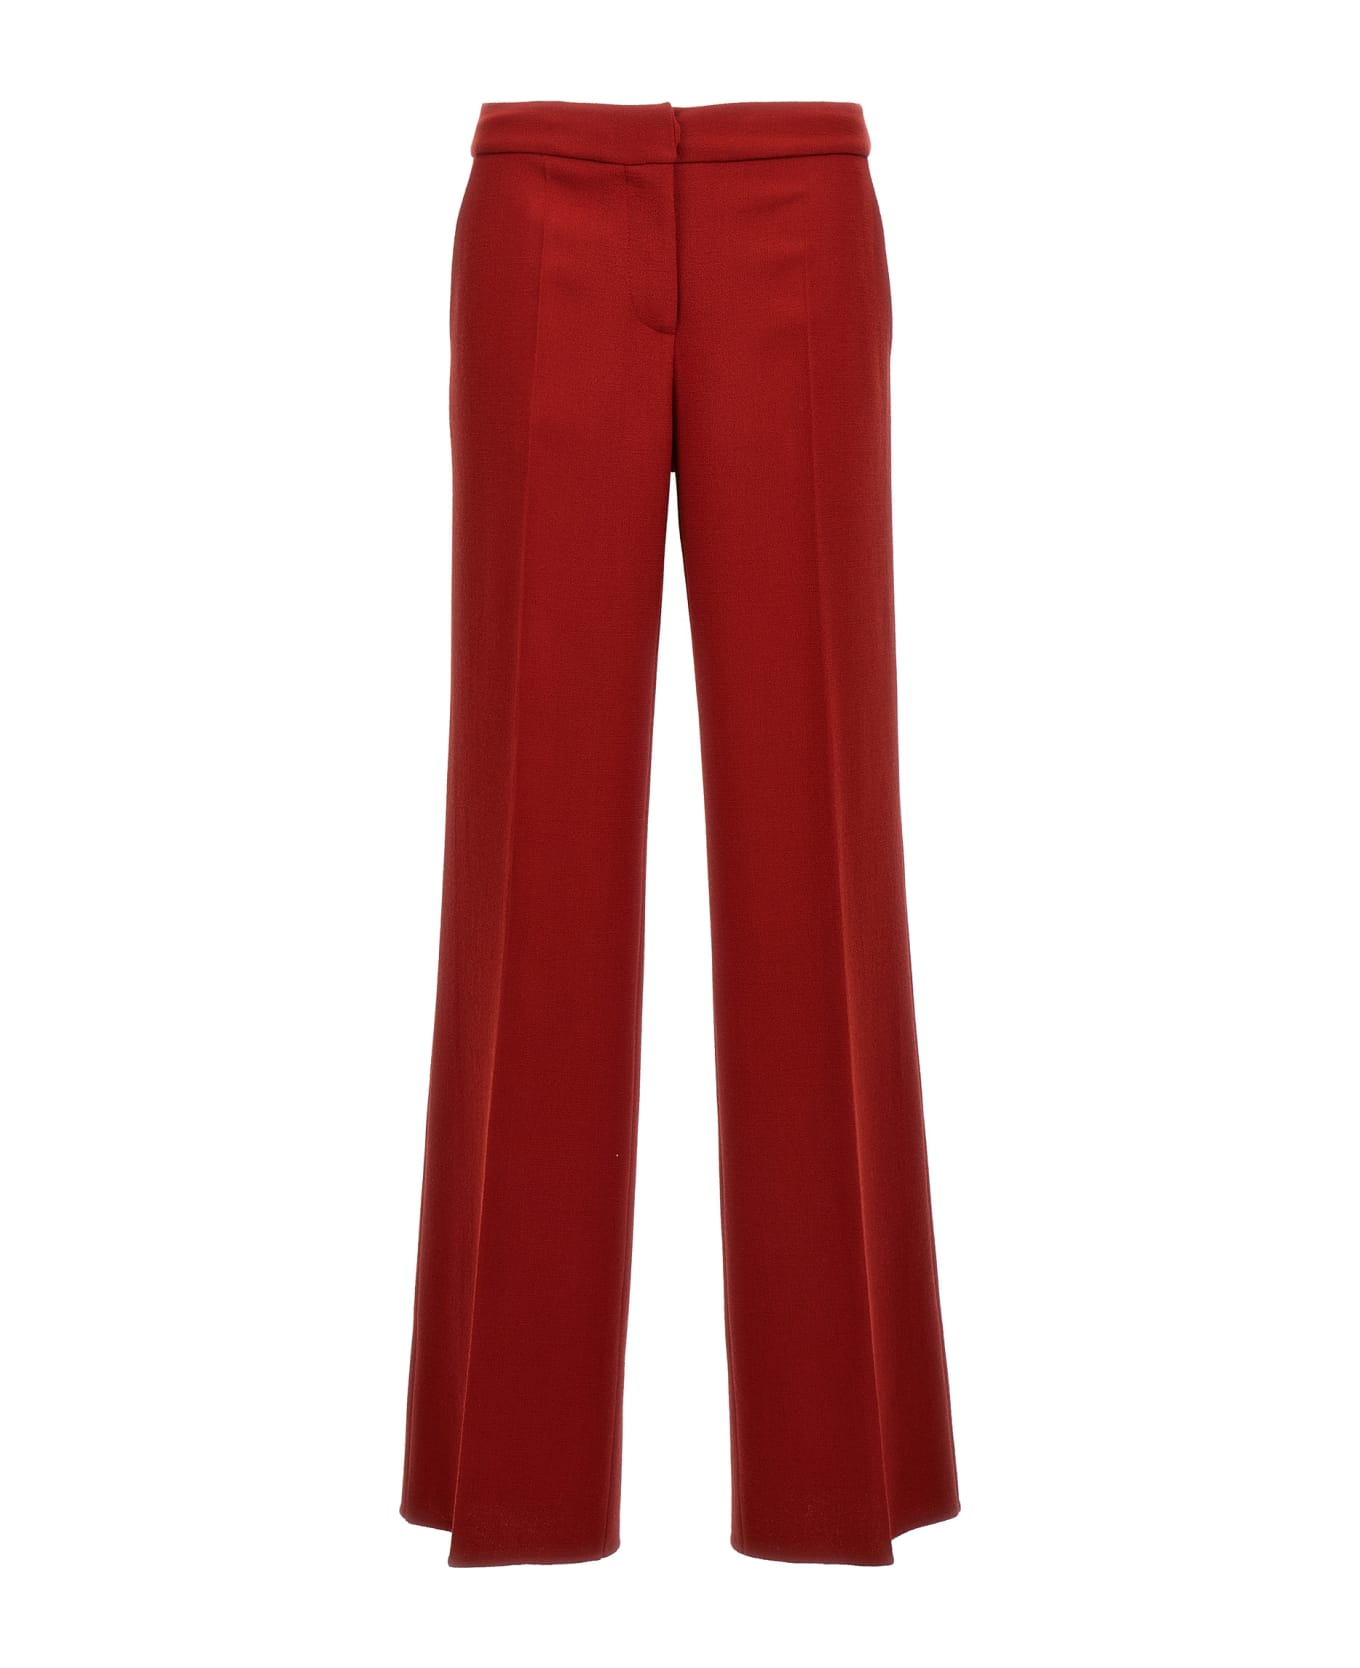 Gianluca Capannolo 'valerie' Pants - Red